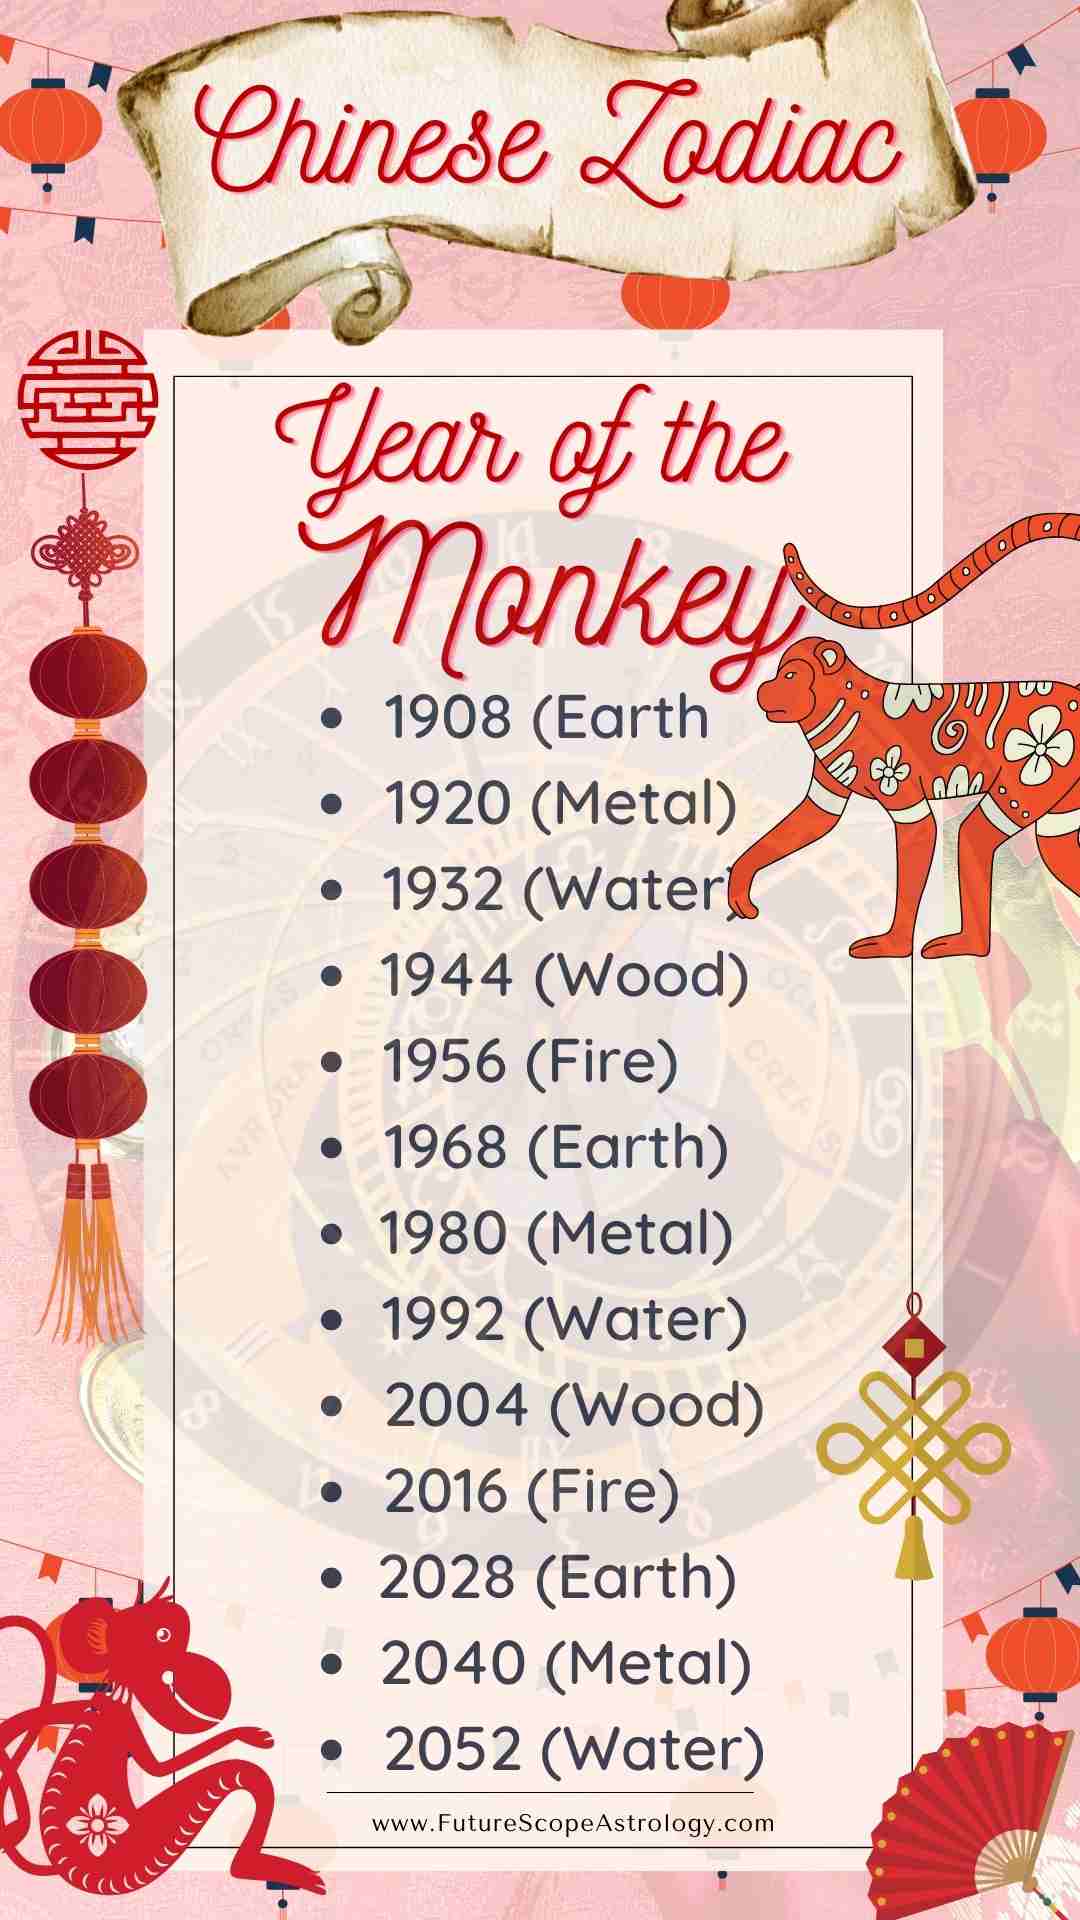 what-are-the-characteristics-of-the-monkey-in-chinese-astrology